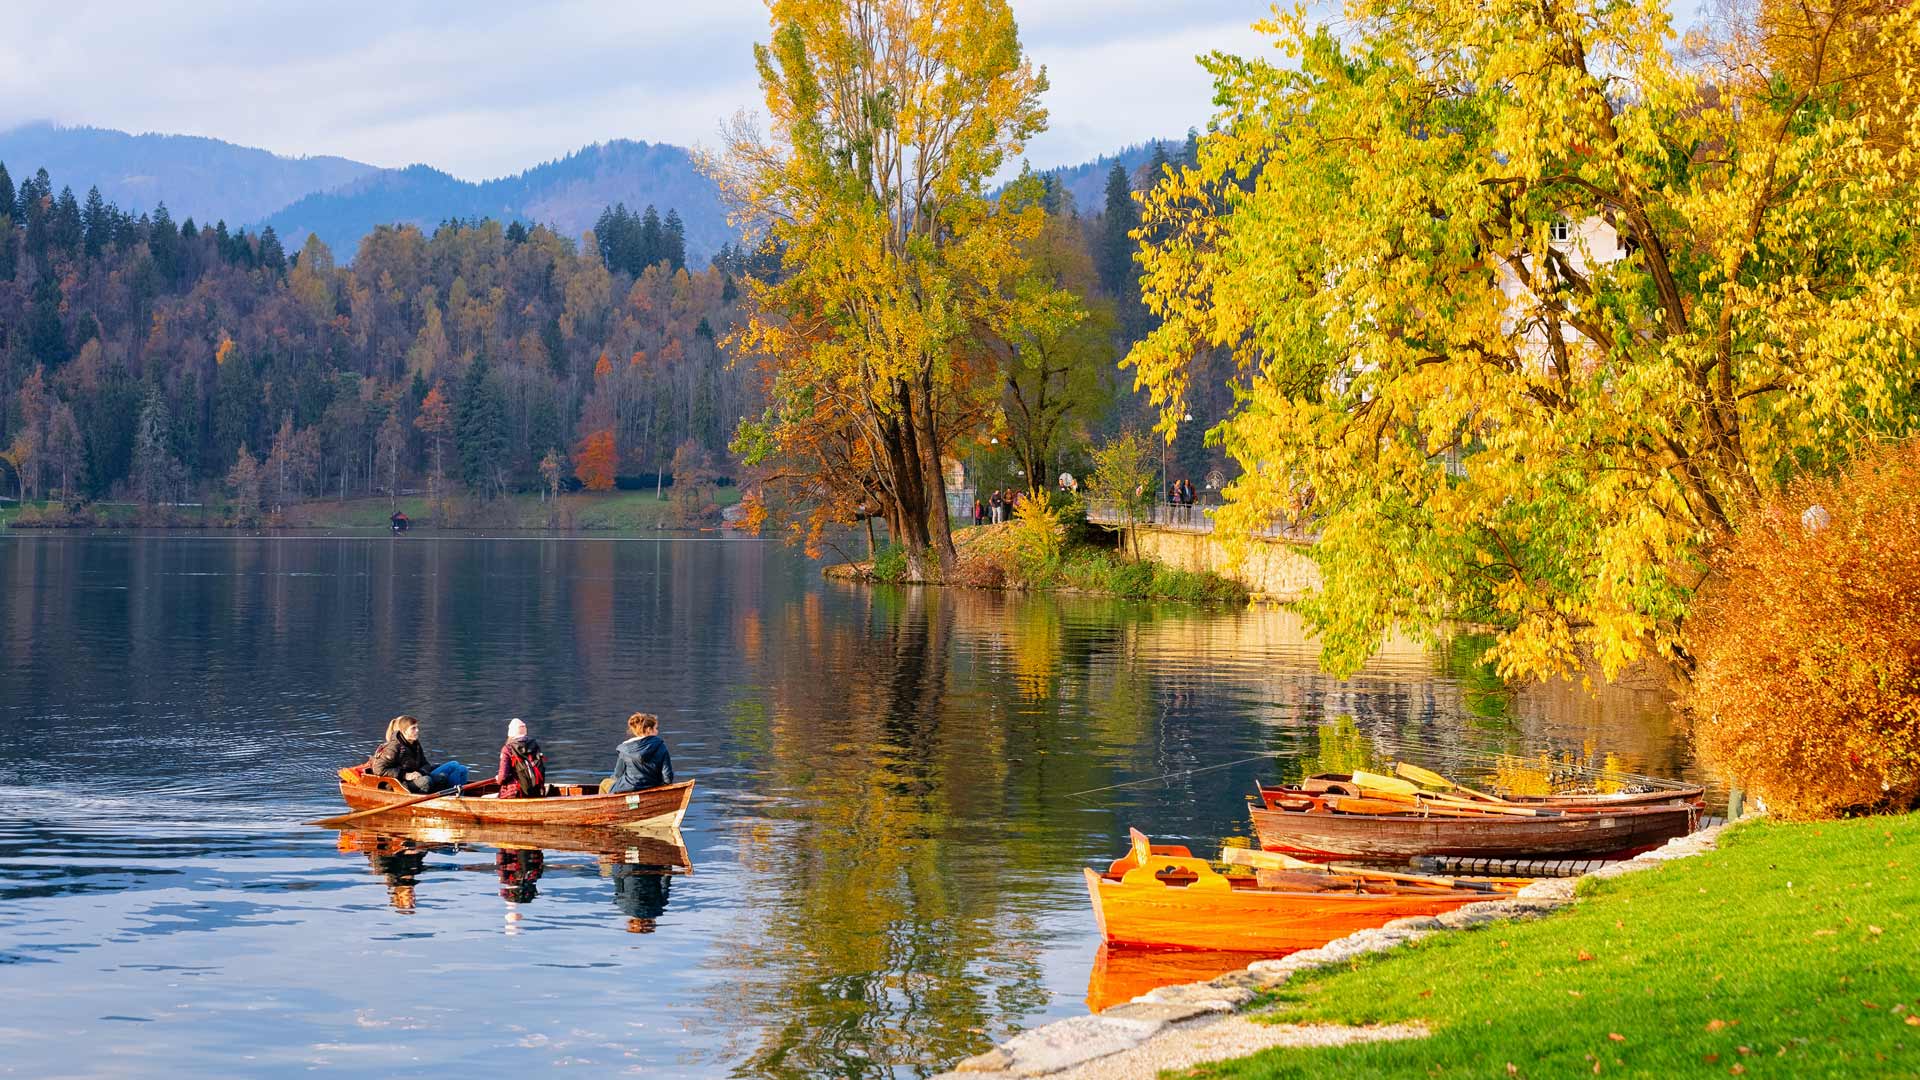 Landscape image of lake during autumn with people in a boat.